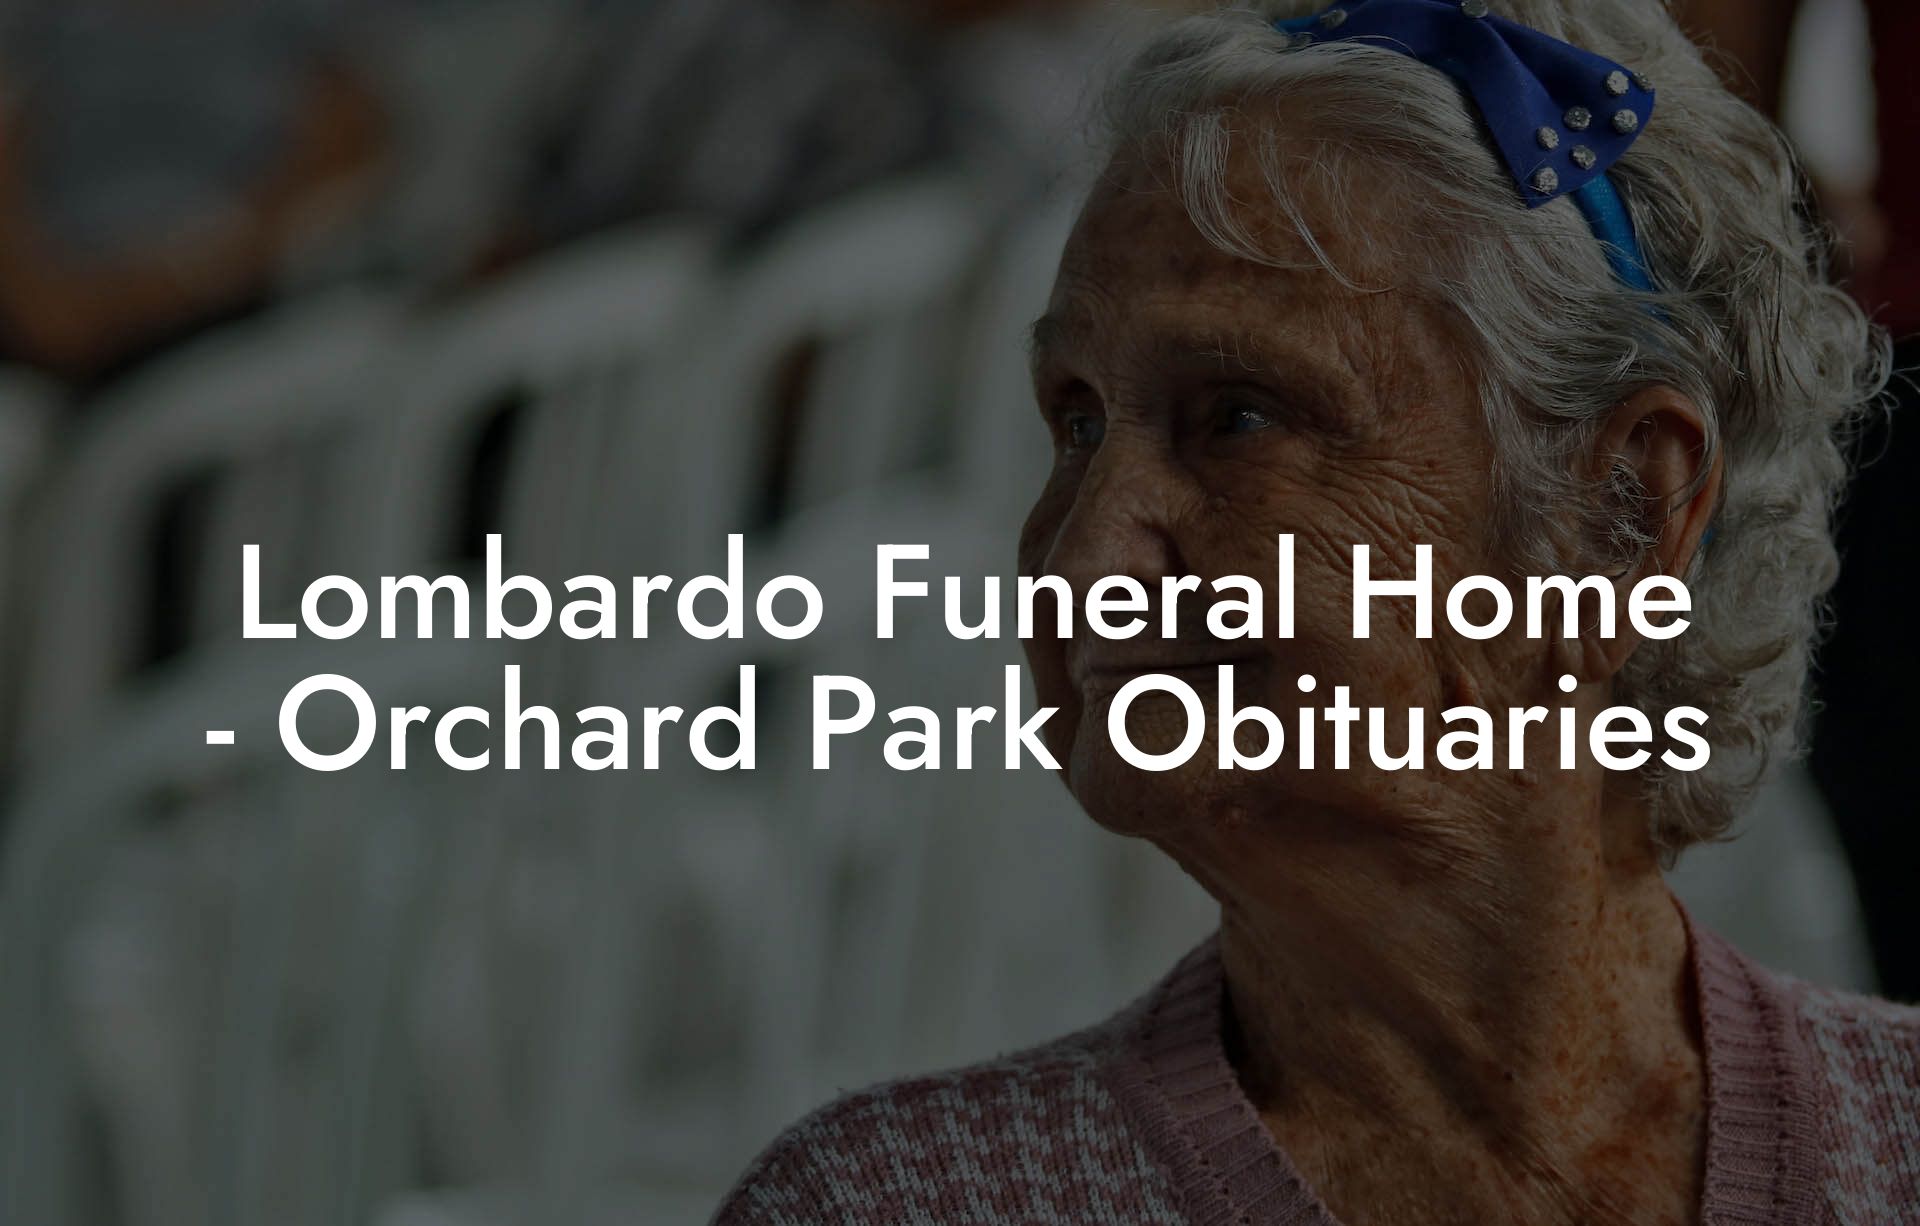 Lombardo Funeral Home - Orchard Park Obituaries